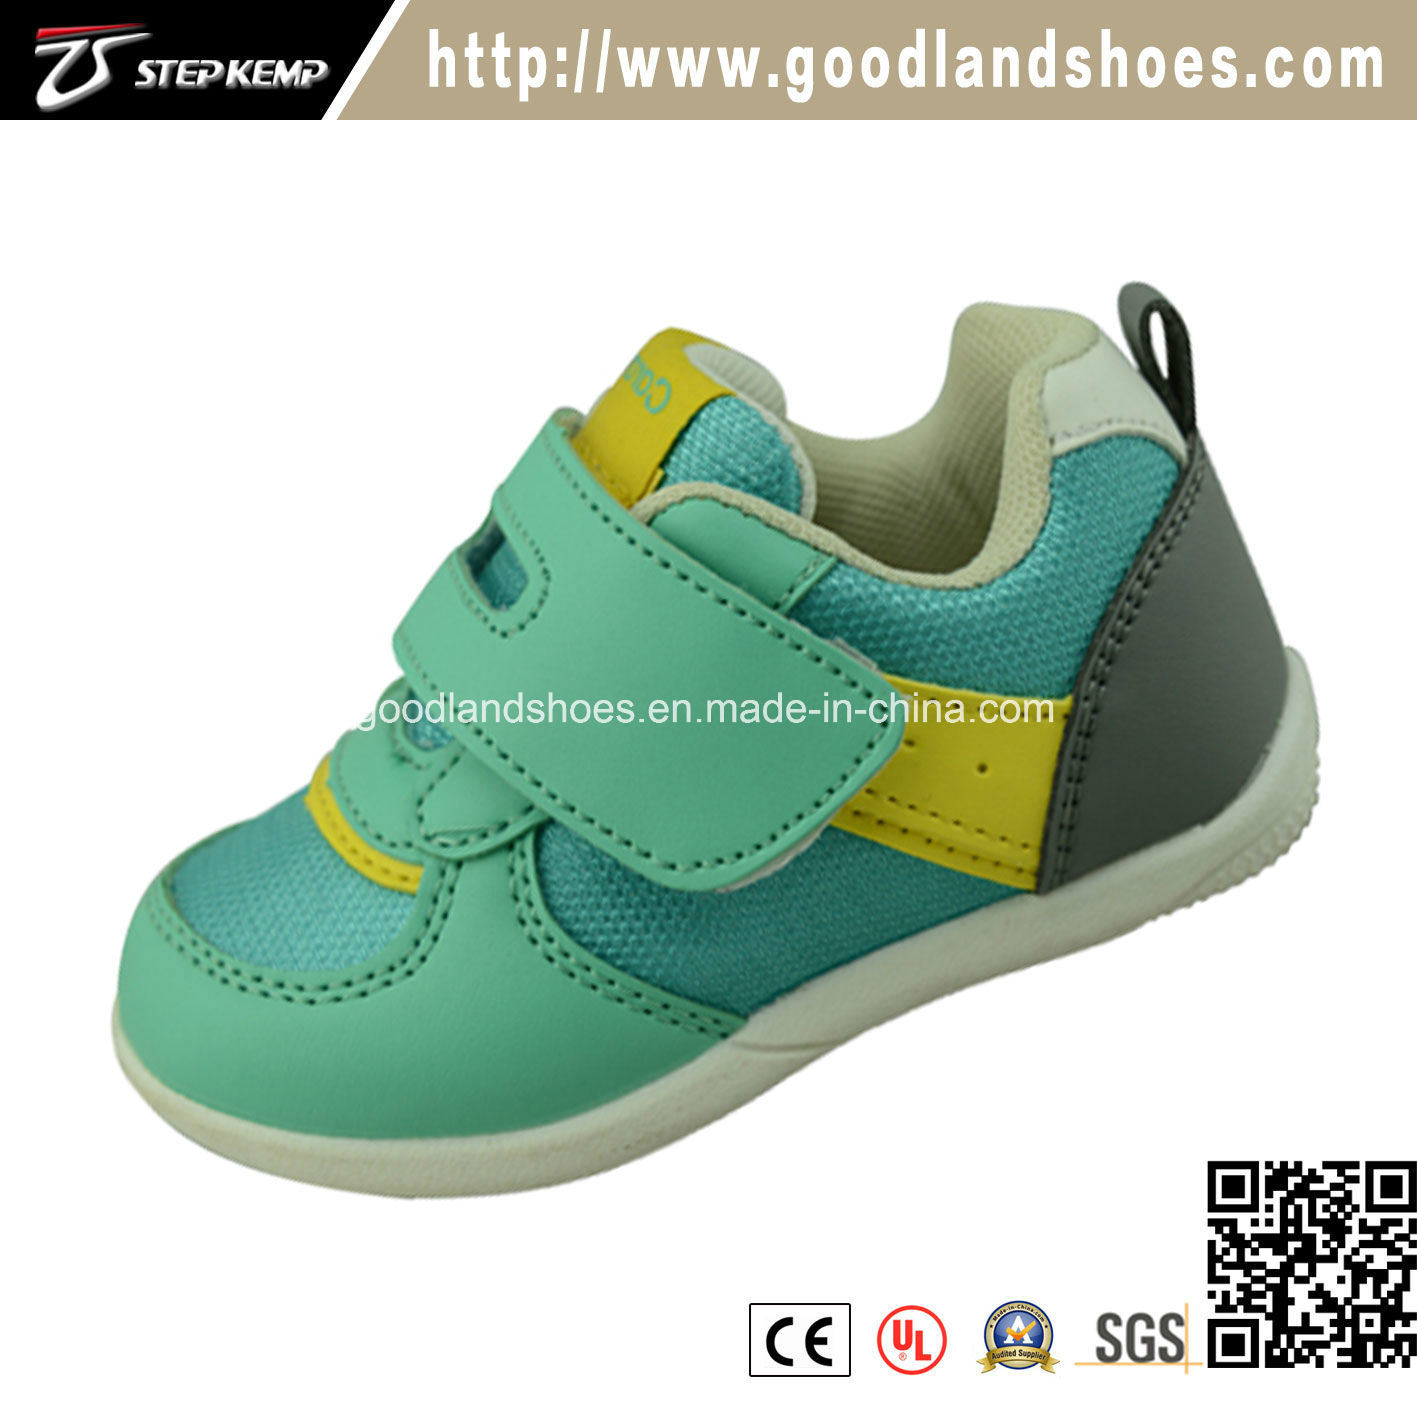 High Quality Baby Shoe Hot Selling Sport Baby Shoes 20006-1